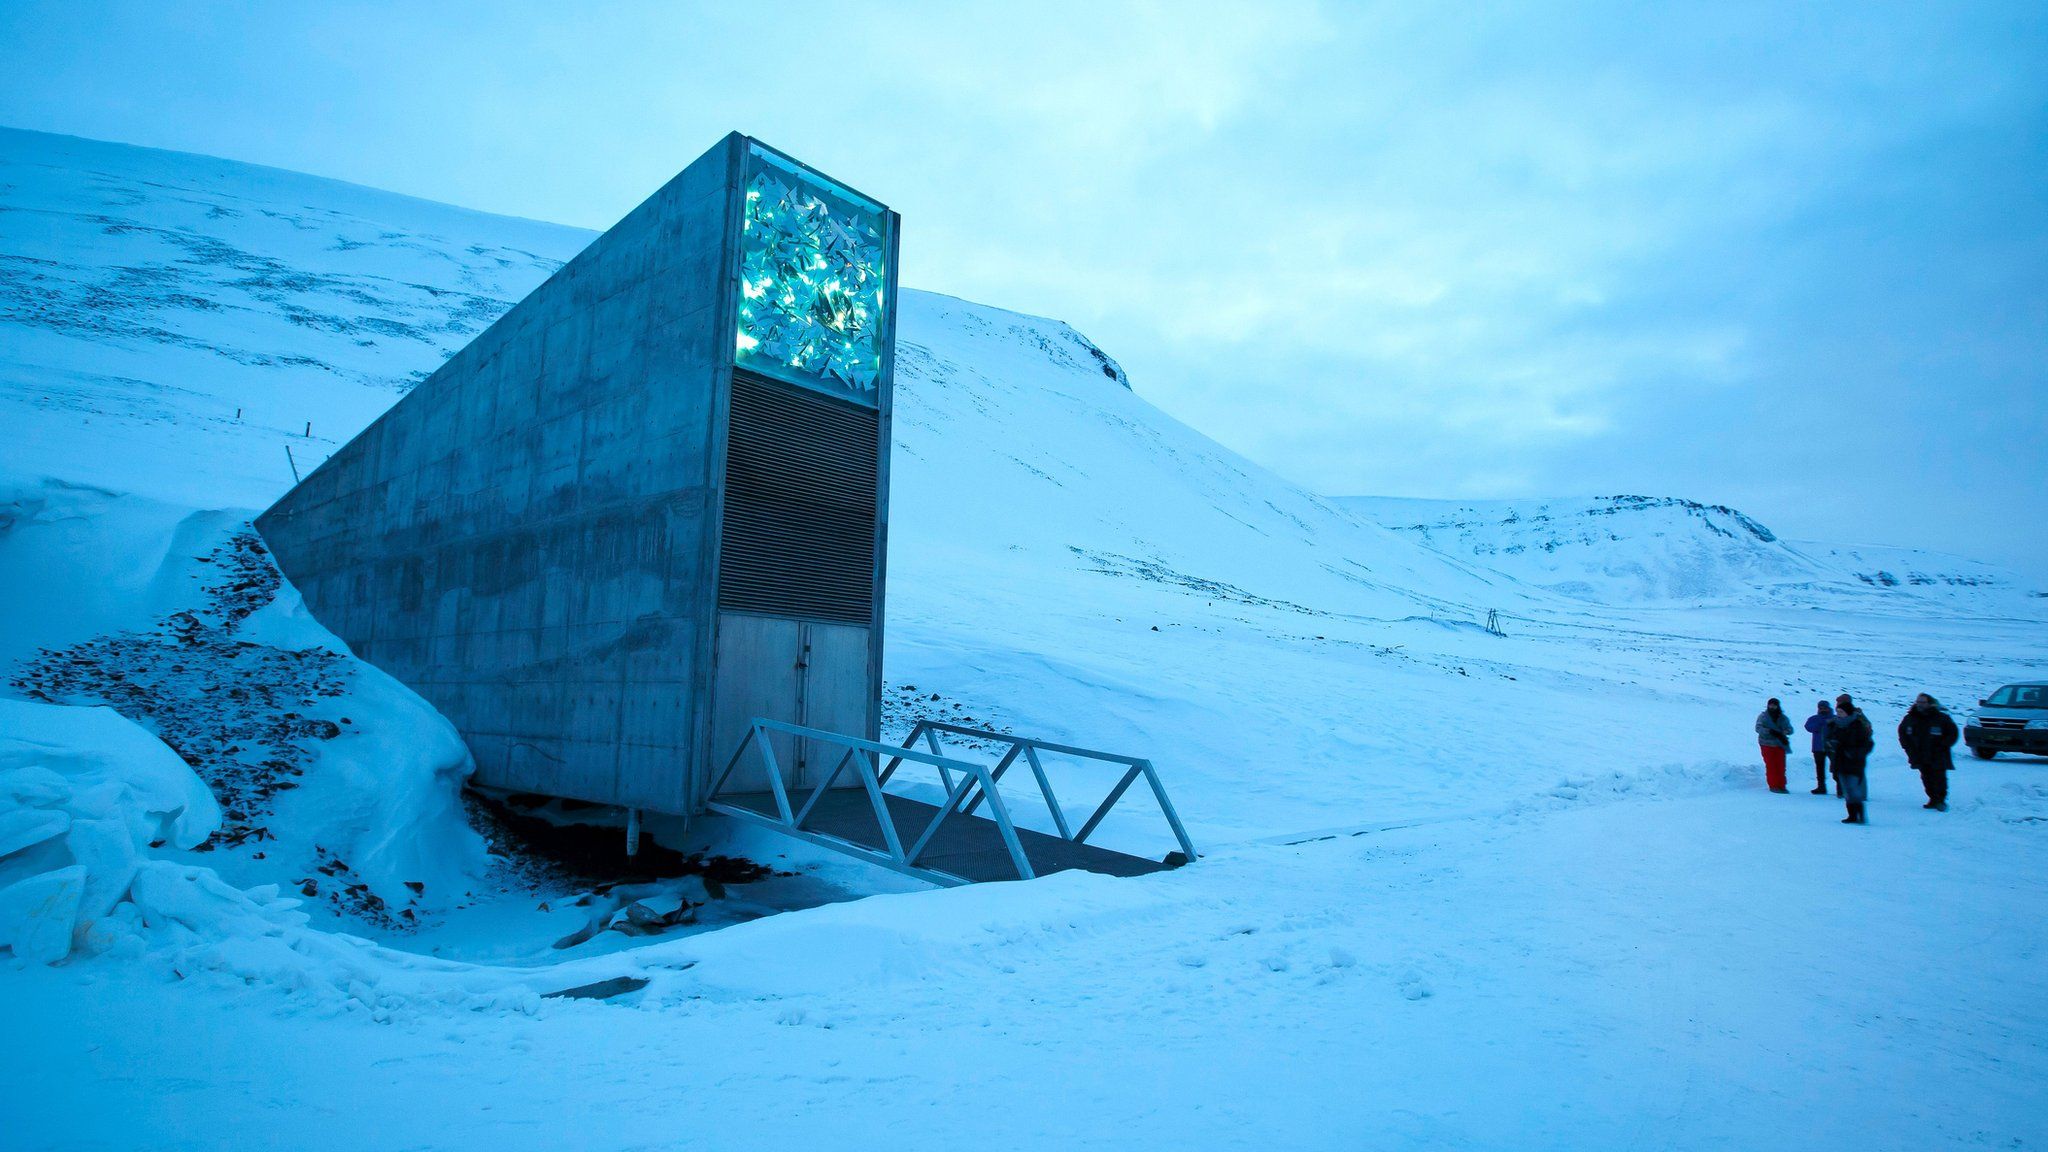 The entrance of the Svalbard Global Seed Vault